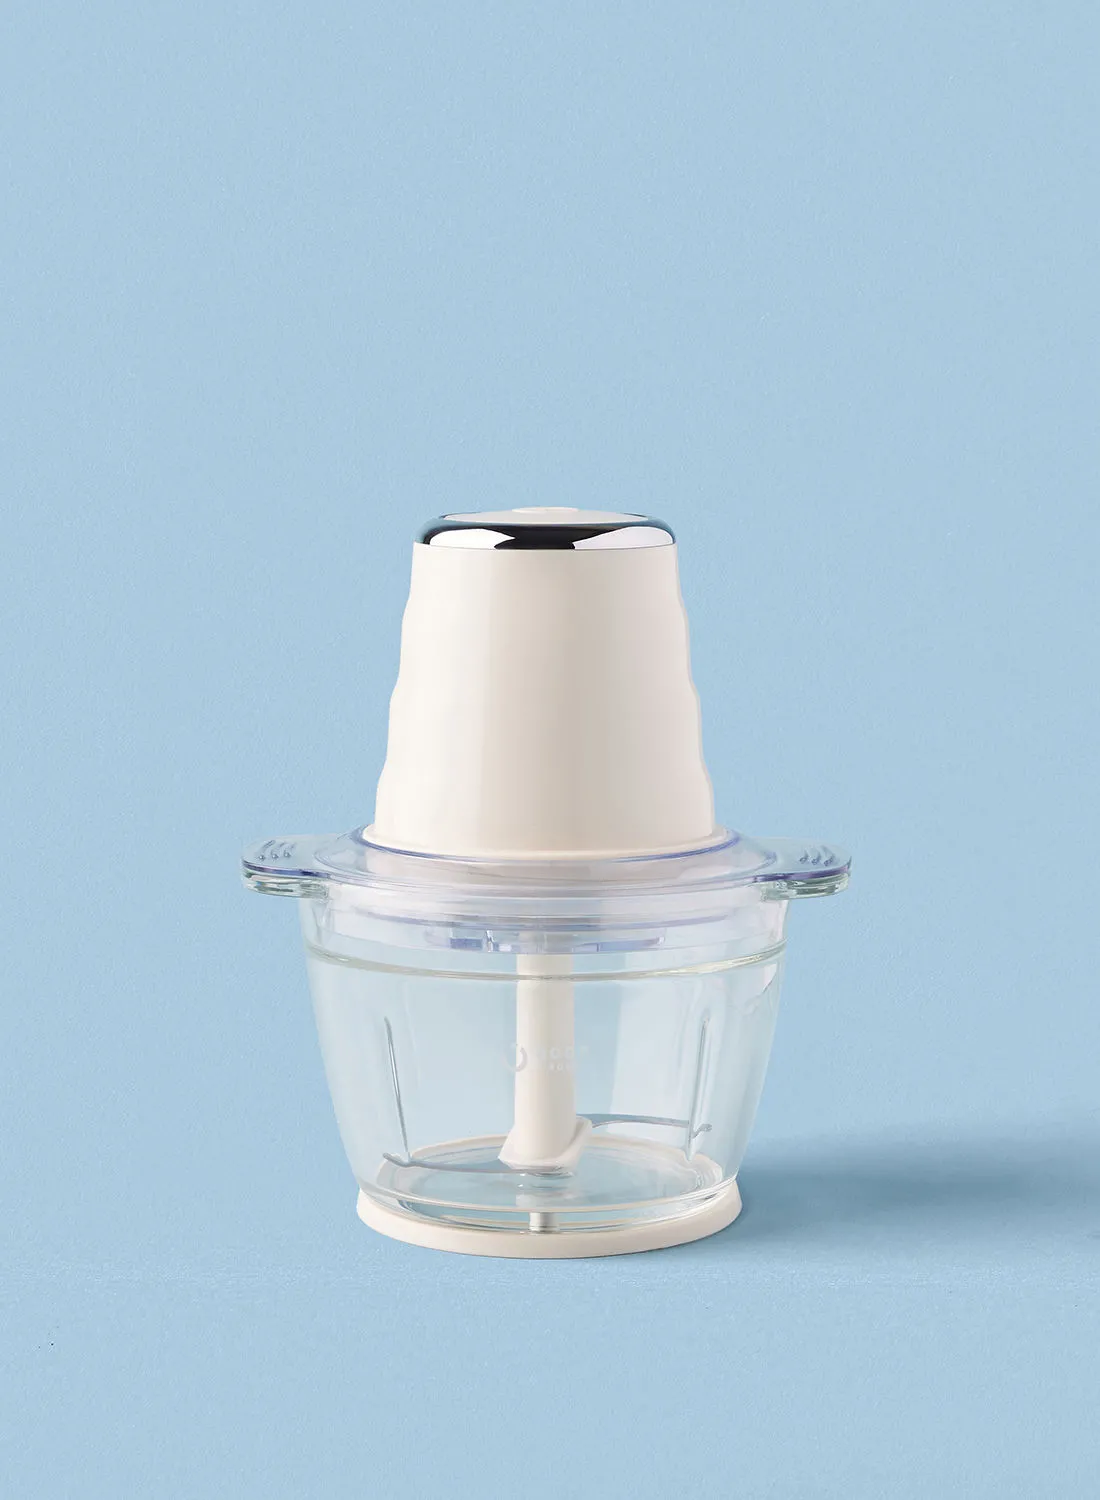 Noon East Electric Chopper - Mini Food Processor 1 Liter 400 W Milk White/Clear For Onion, Garlic, Meat, Spices, Nuts, Vegetables Chopper 1.0 L 400.0 W MC-360 Milk White/Clear